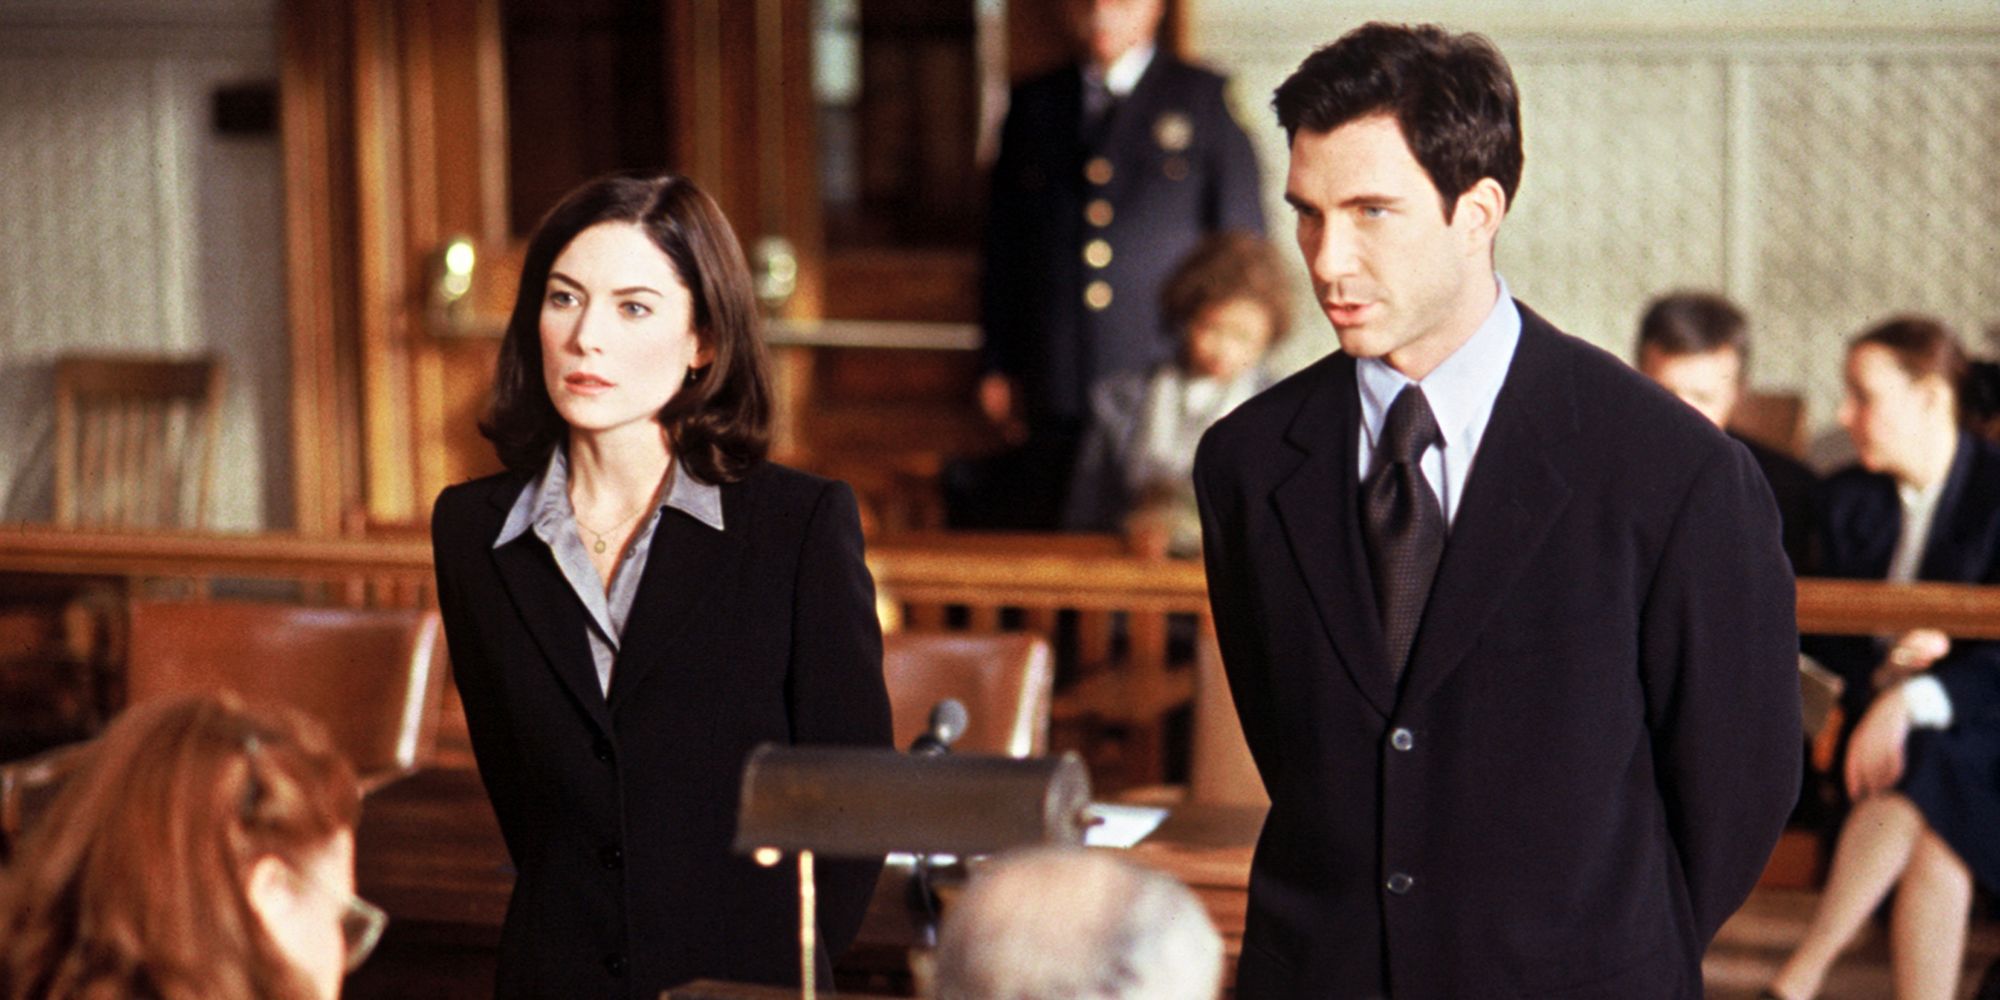 two lawyers standing up in a courtroom